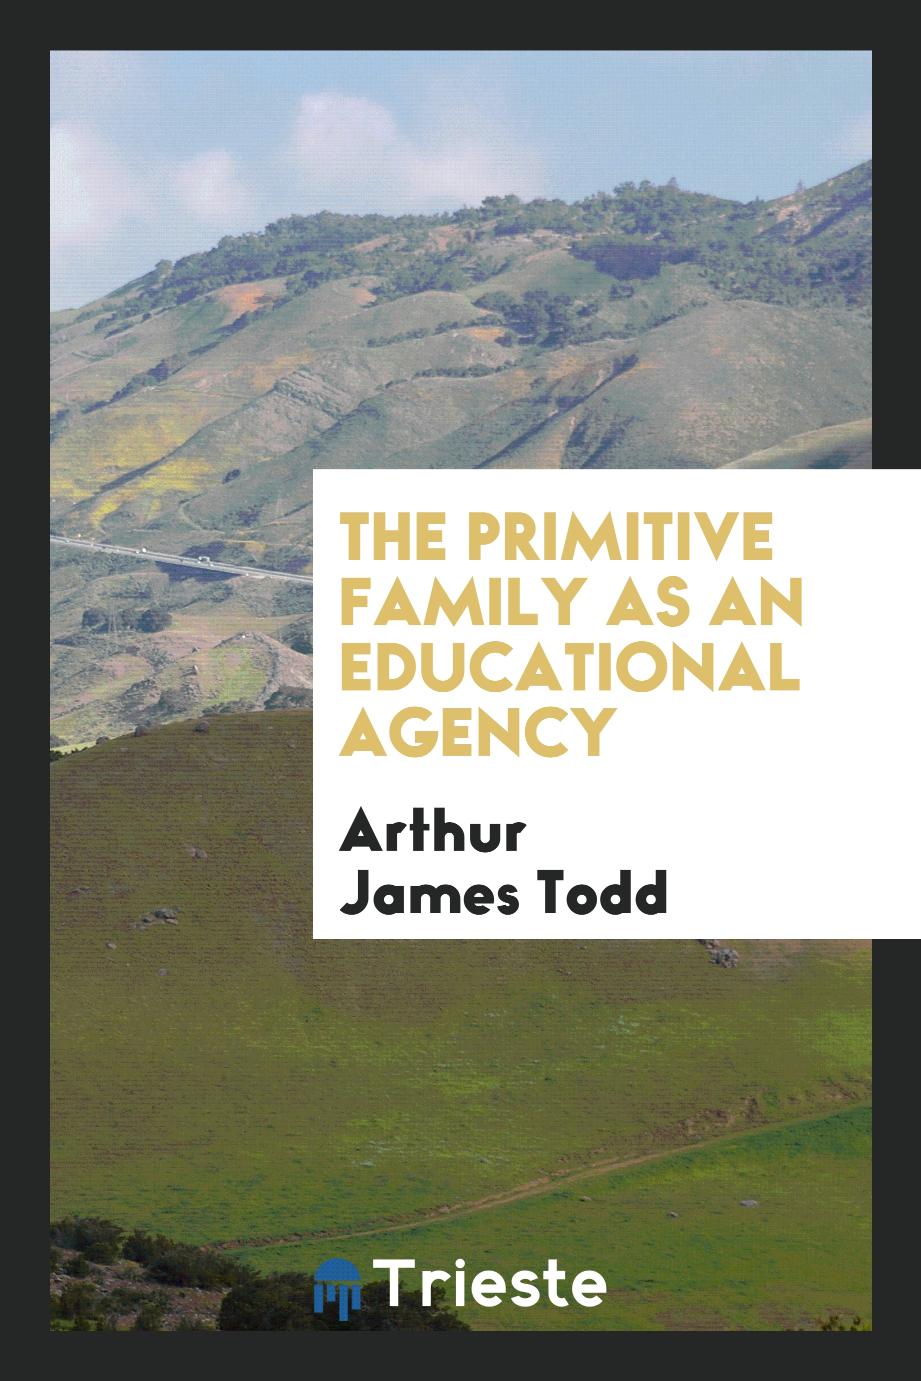 The primitive family as an educational agency